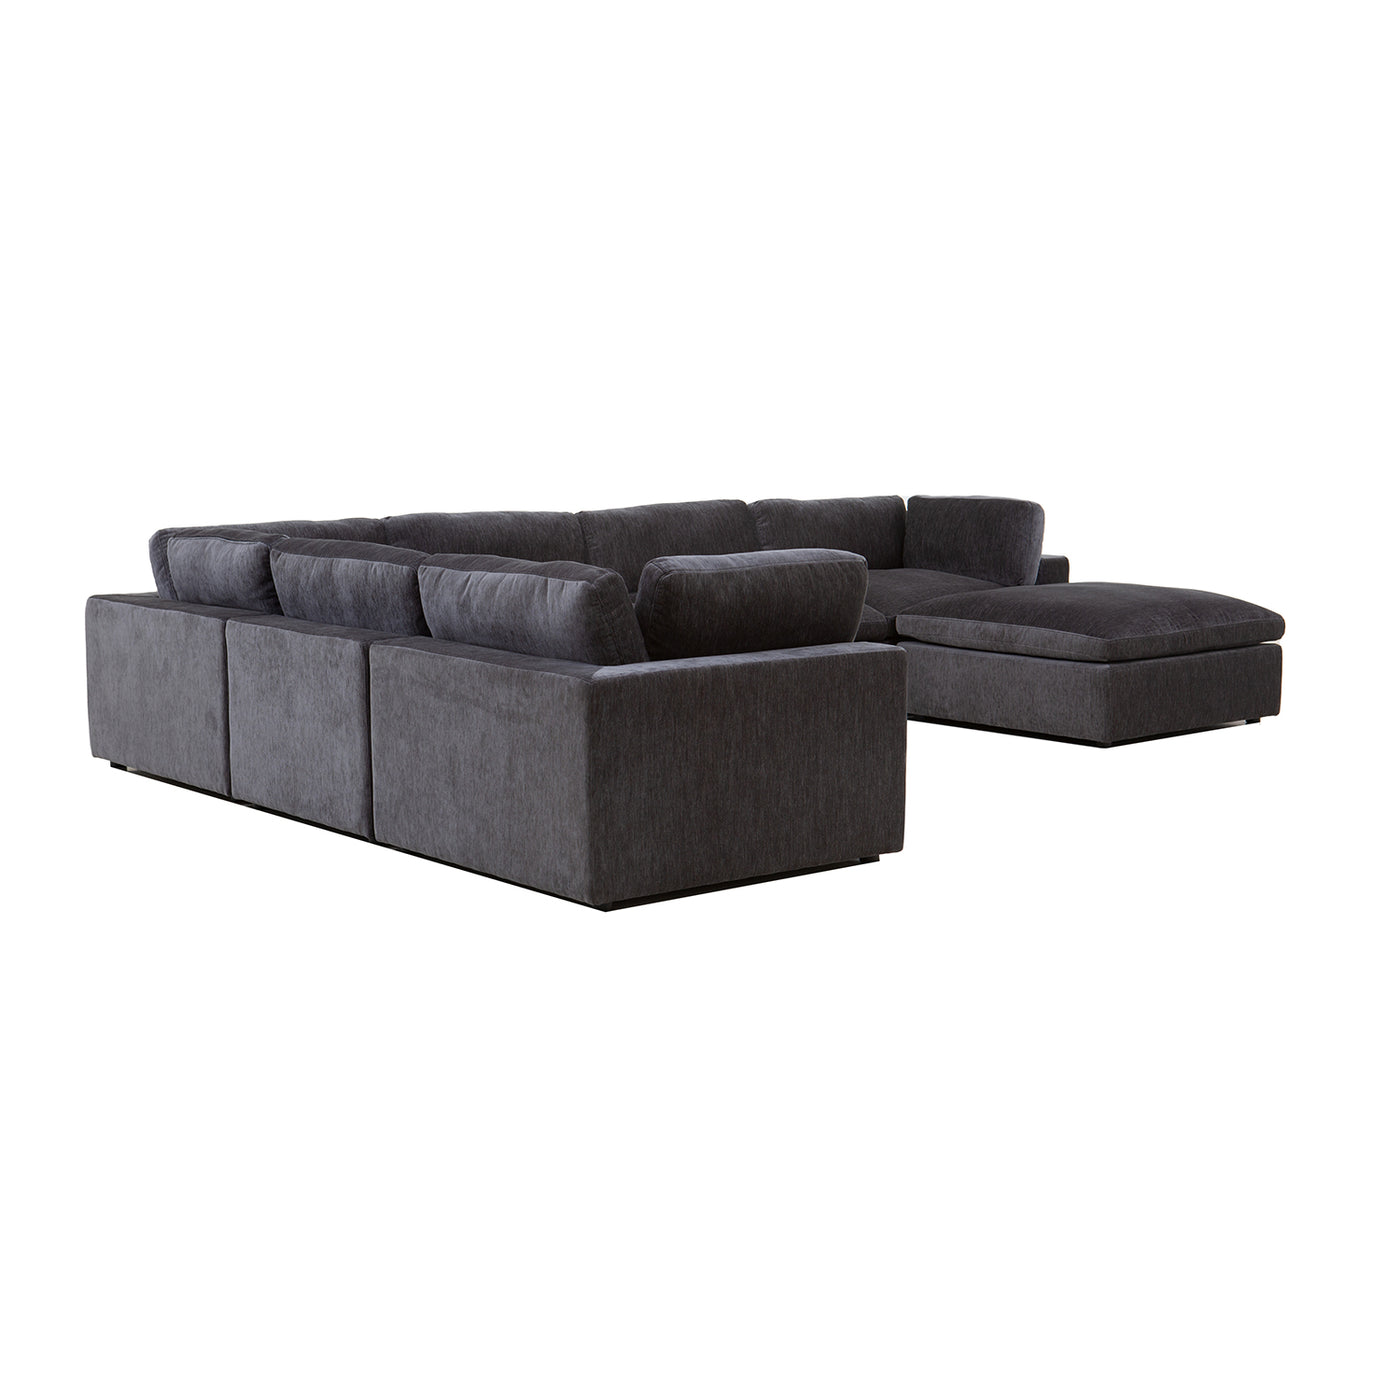 Zephyr 7 piece closed  Left-Sectional